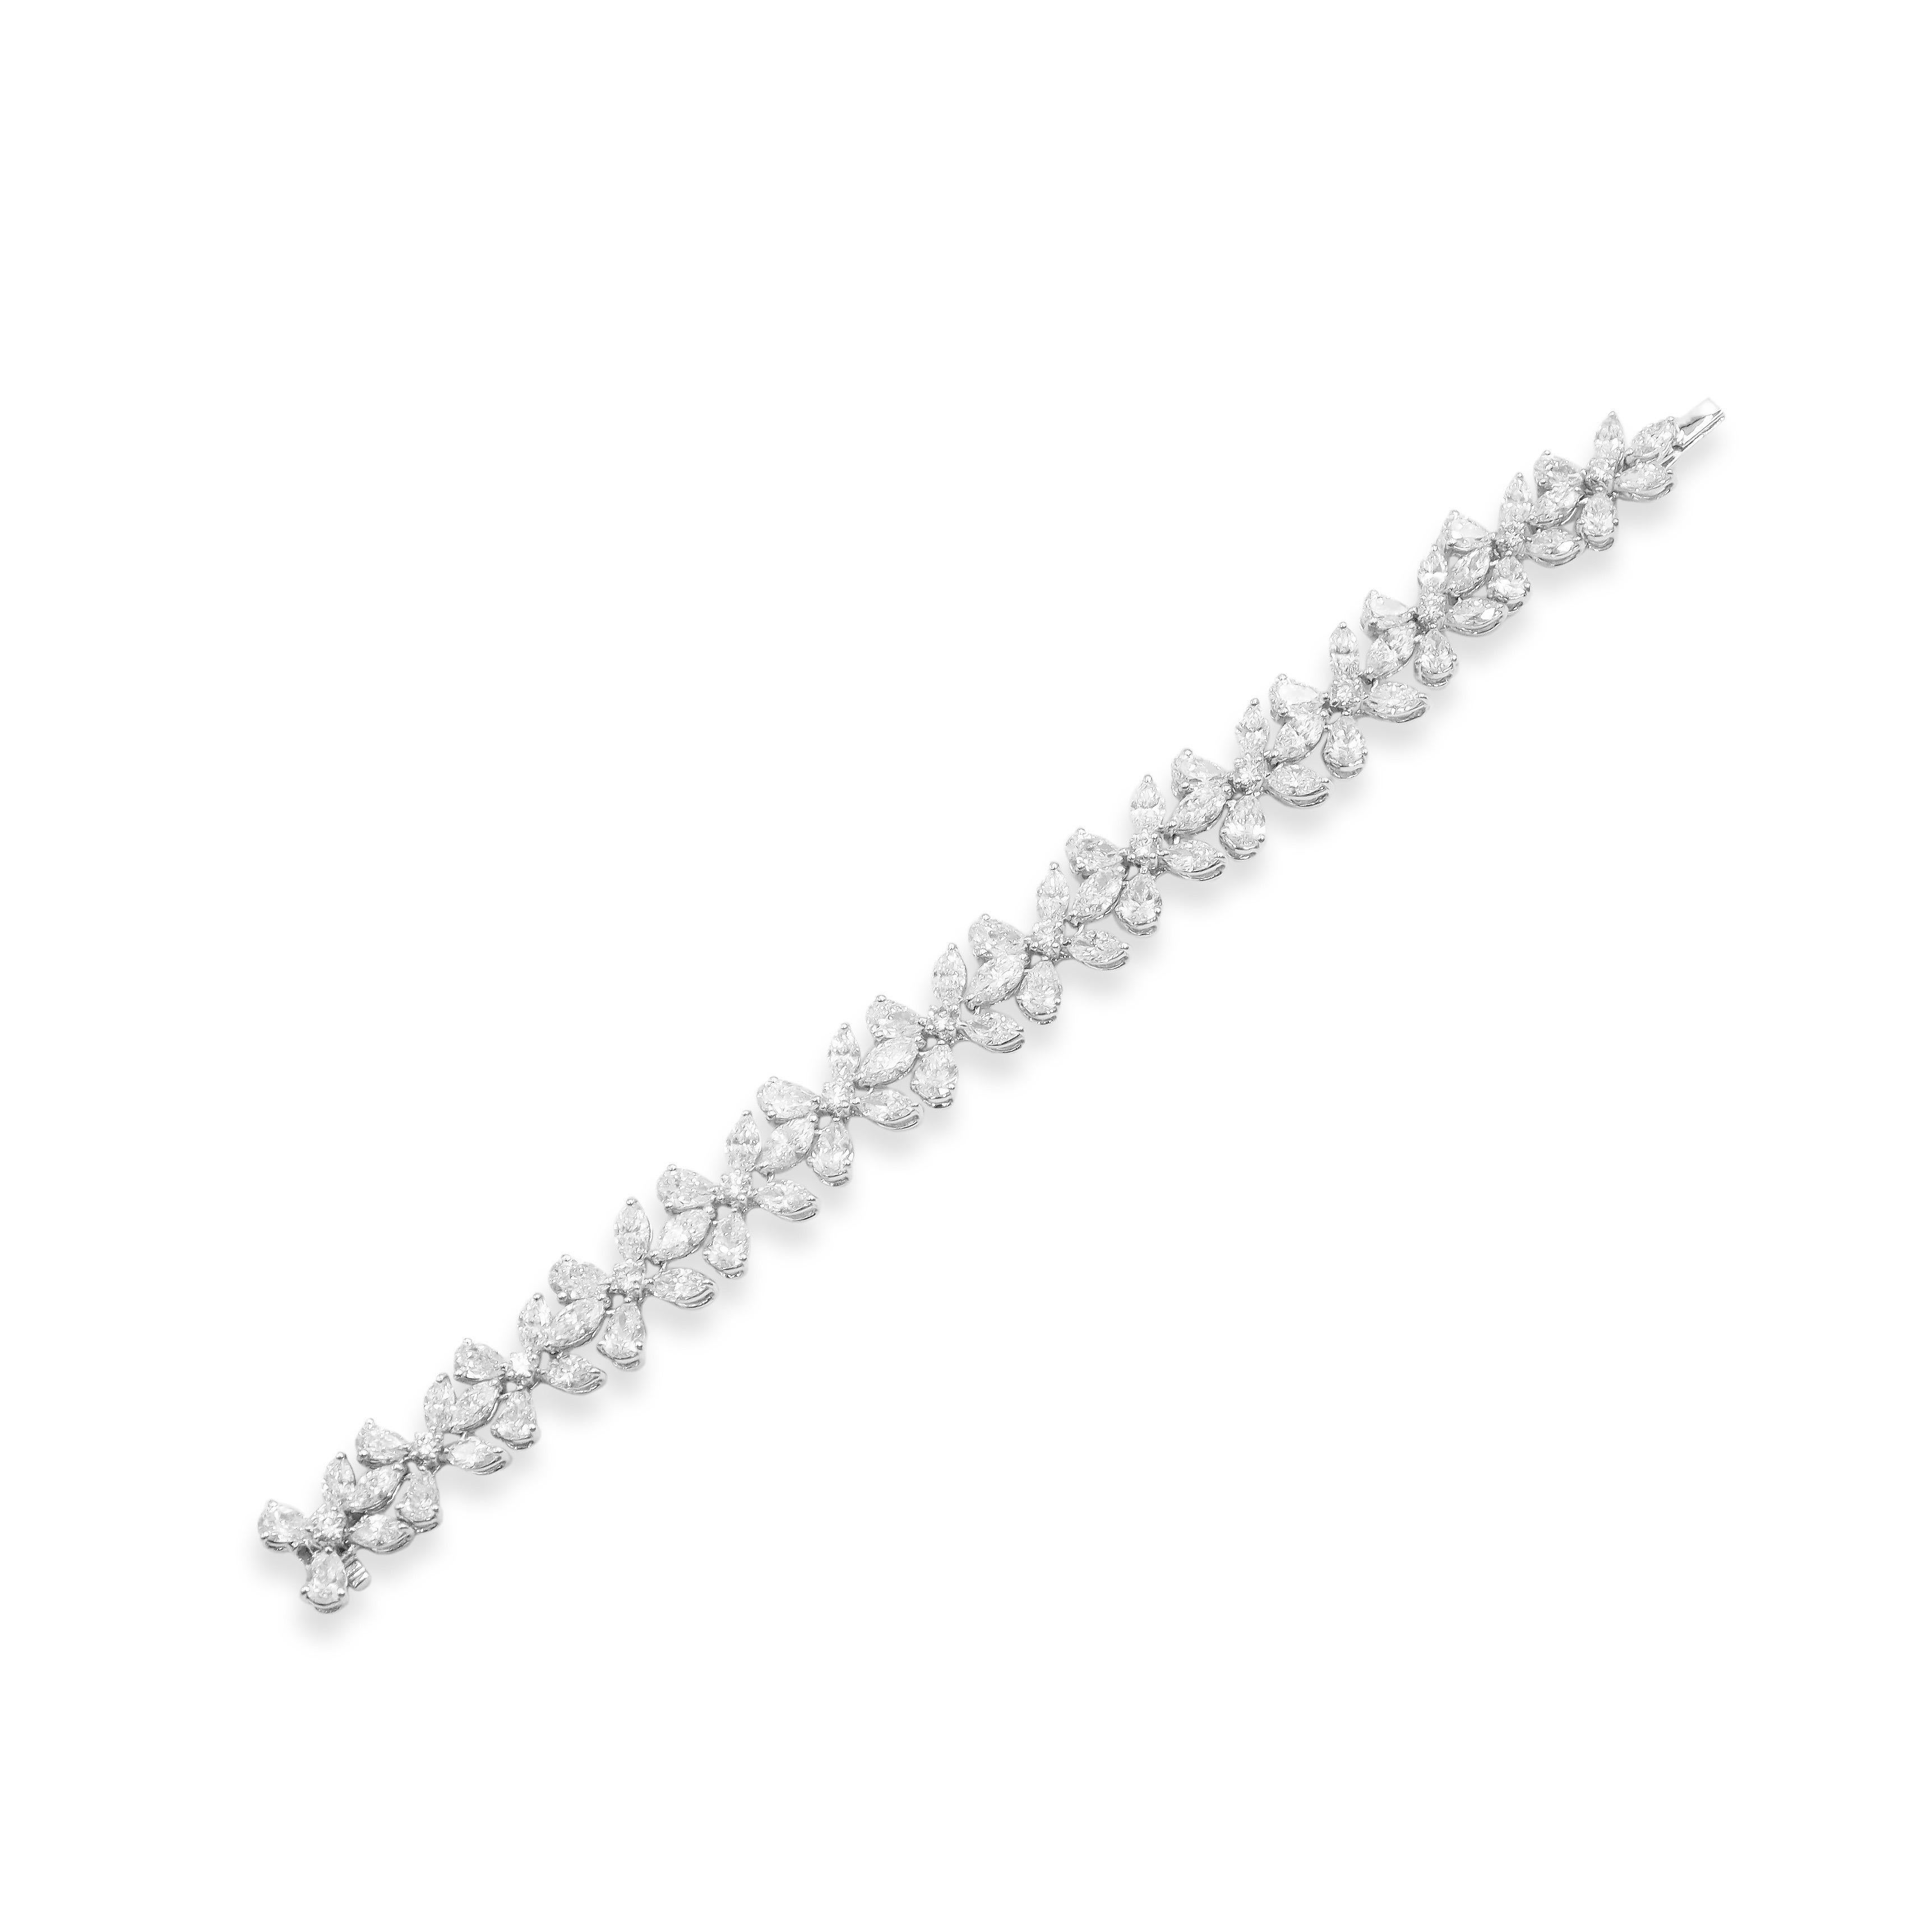 From Emilio Jewelry located on New York's iconic Fifth Avenue, 
A gorgeous diamond bracelet featuring 17.29 Carats of mixed shape natural diamonds ranging in color from d-f, clarity vs1-vs2. 
Diamond Weight: 17.3 carats
Please inquire for additional